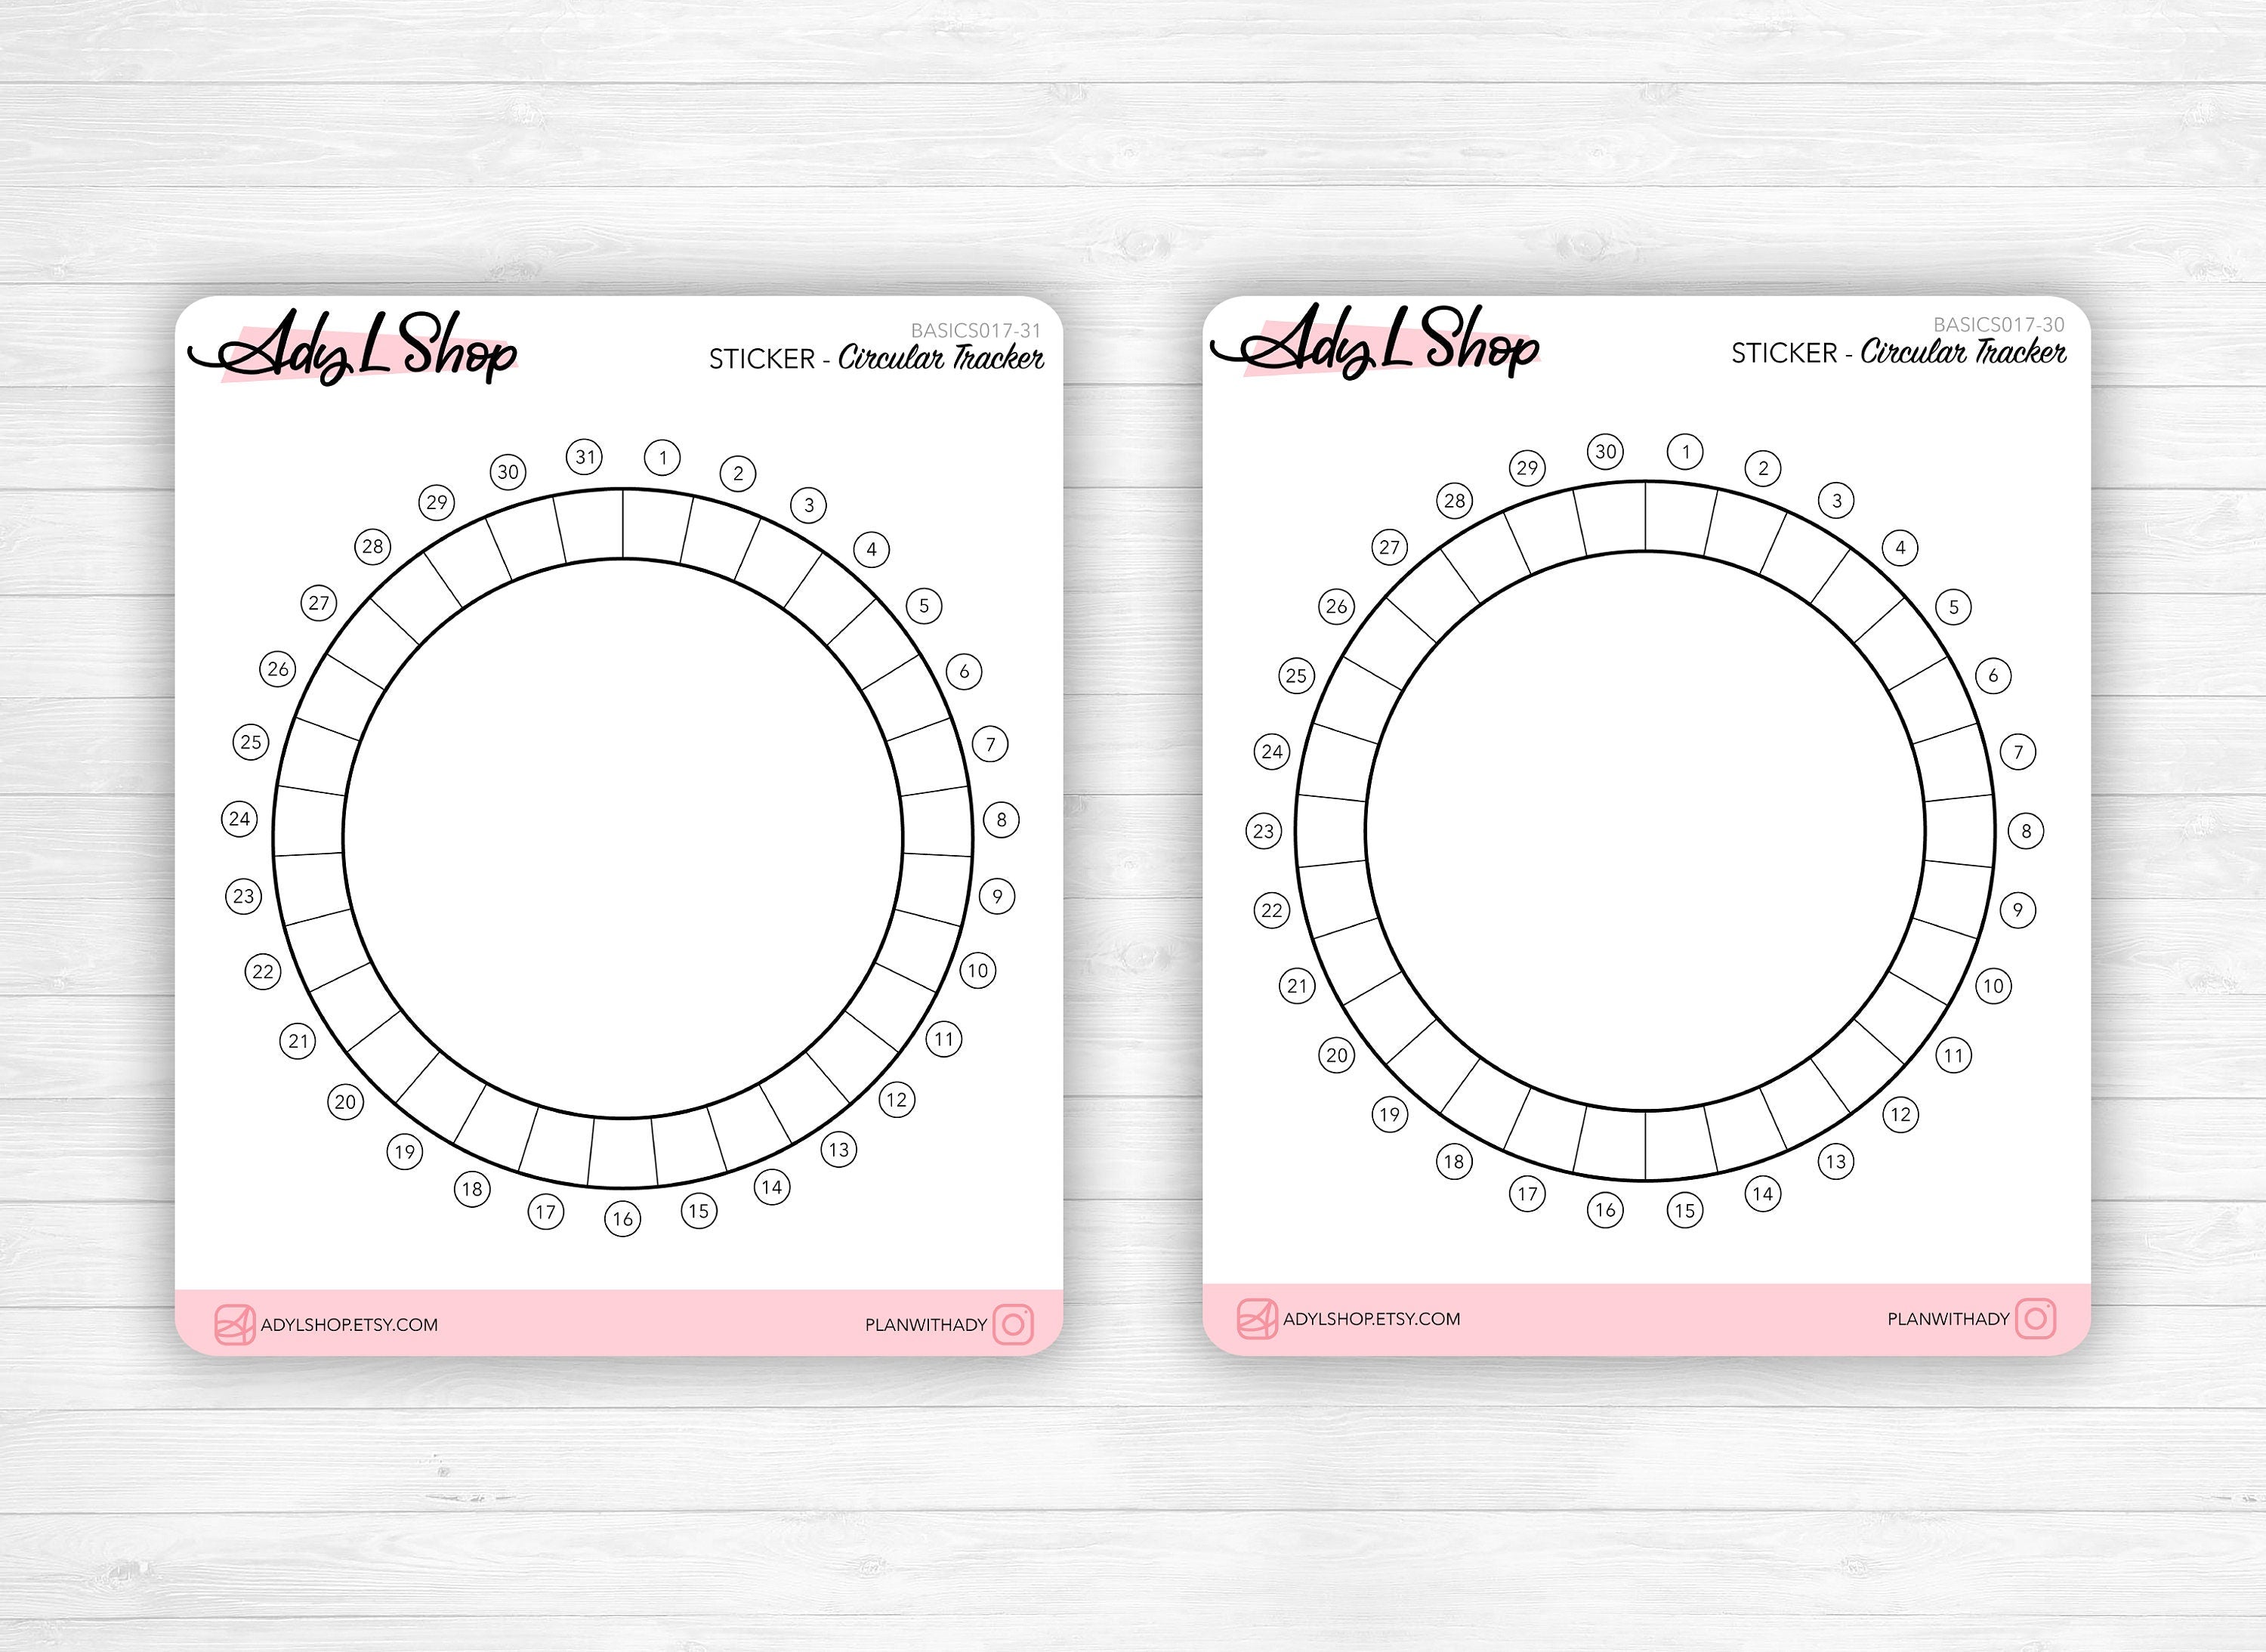  A5 Circle Mood Tracker Stickers in Green - 120 Pieces 5.3 x  8.3 - Craft Journal Snail Mail Planner Journal Diary Paper Sticker Sheet :  Office Products